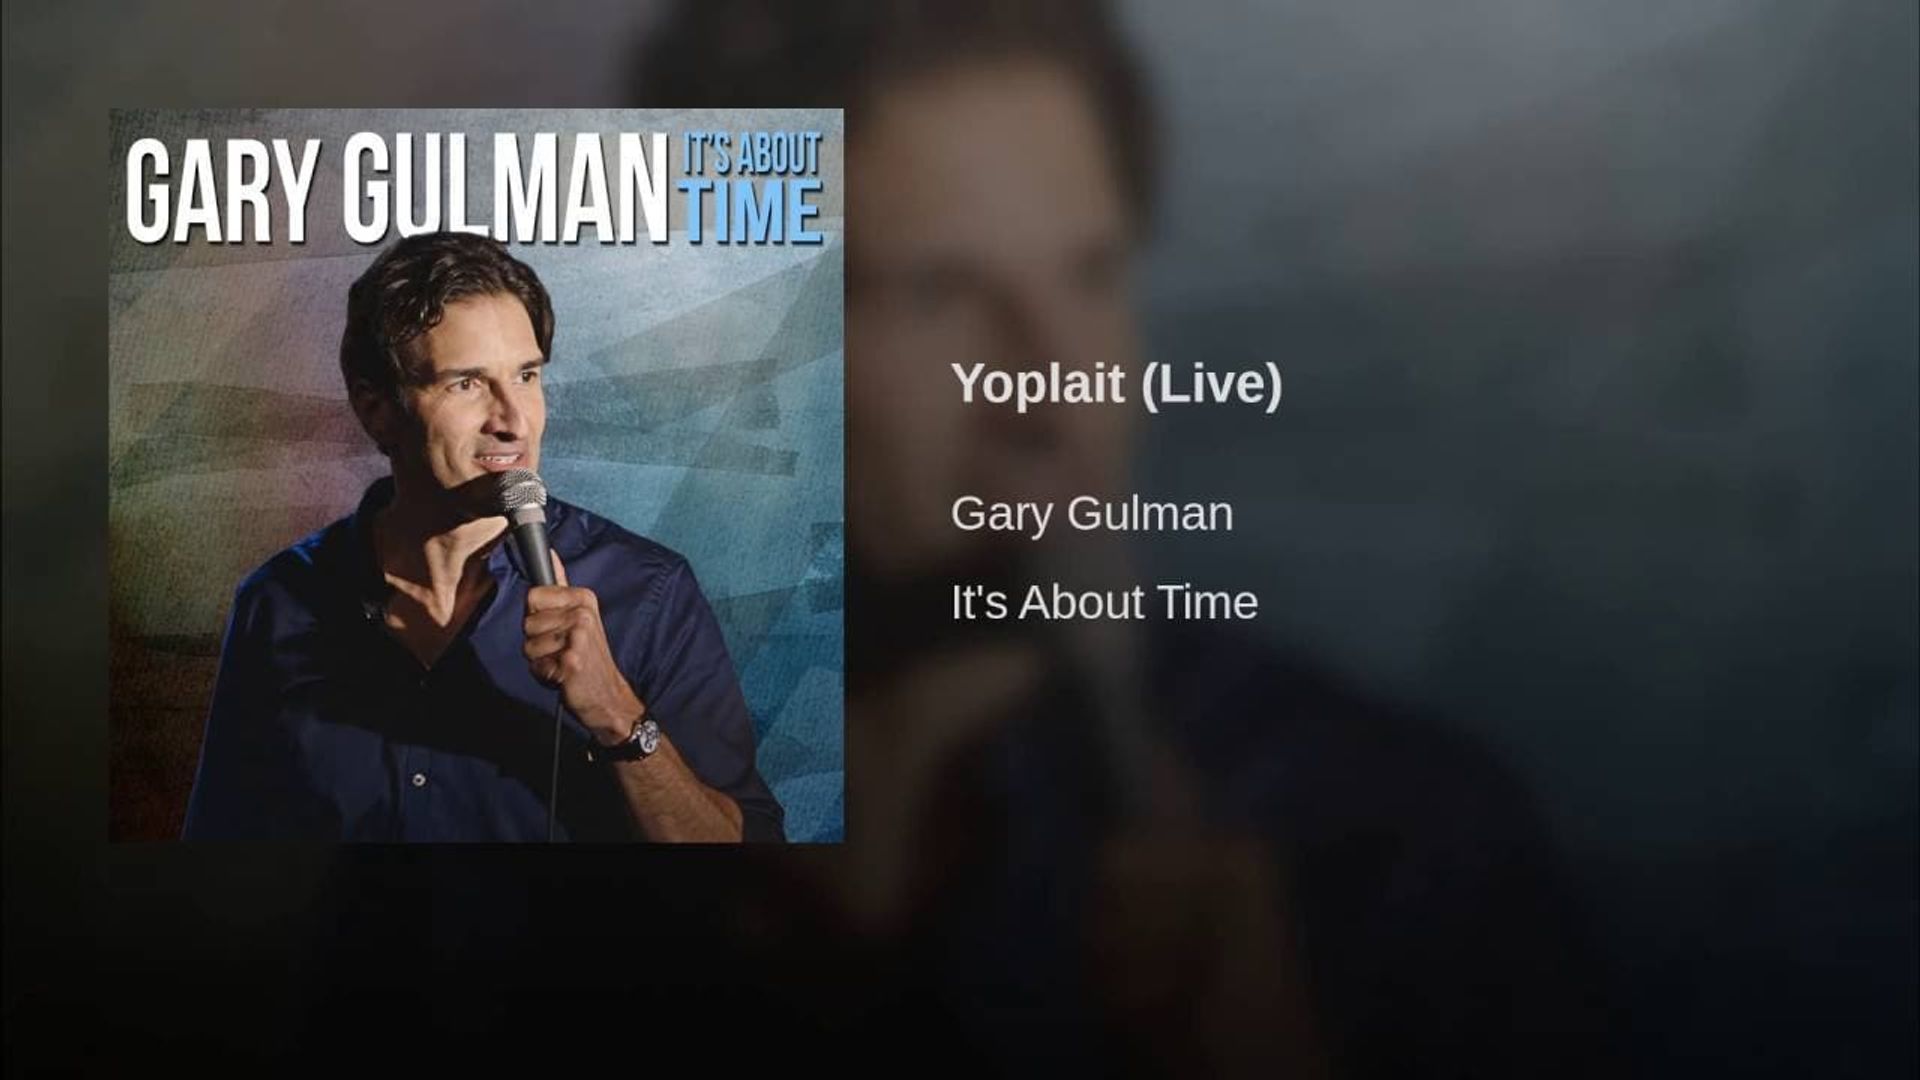 Gary Gulman: It's About Time background